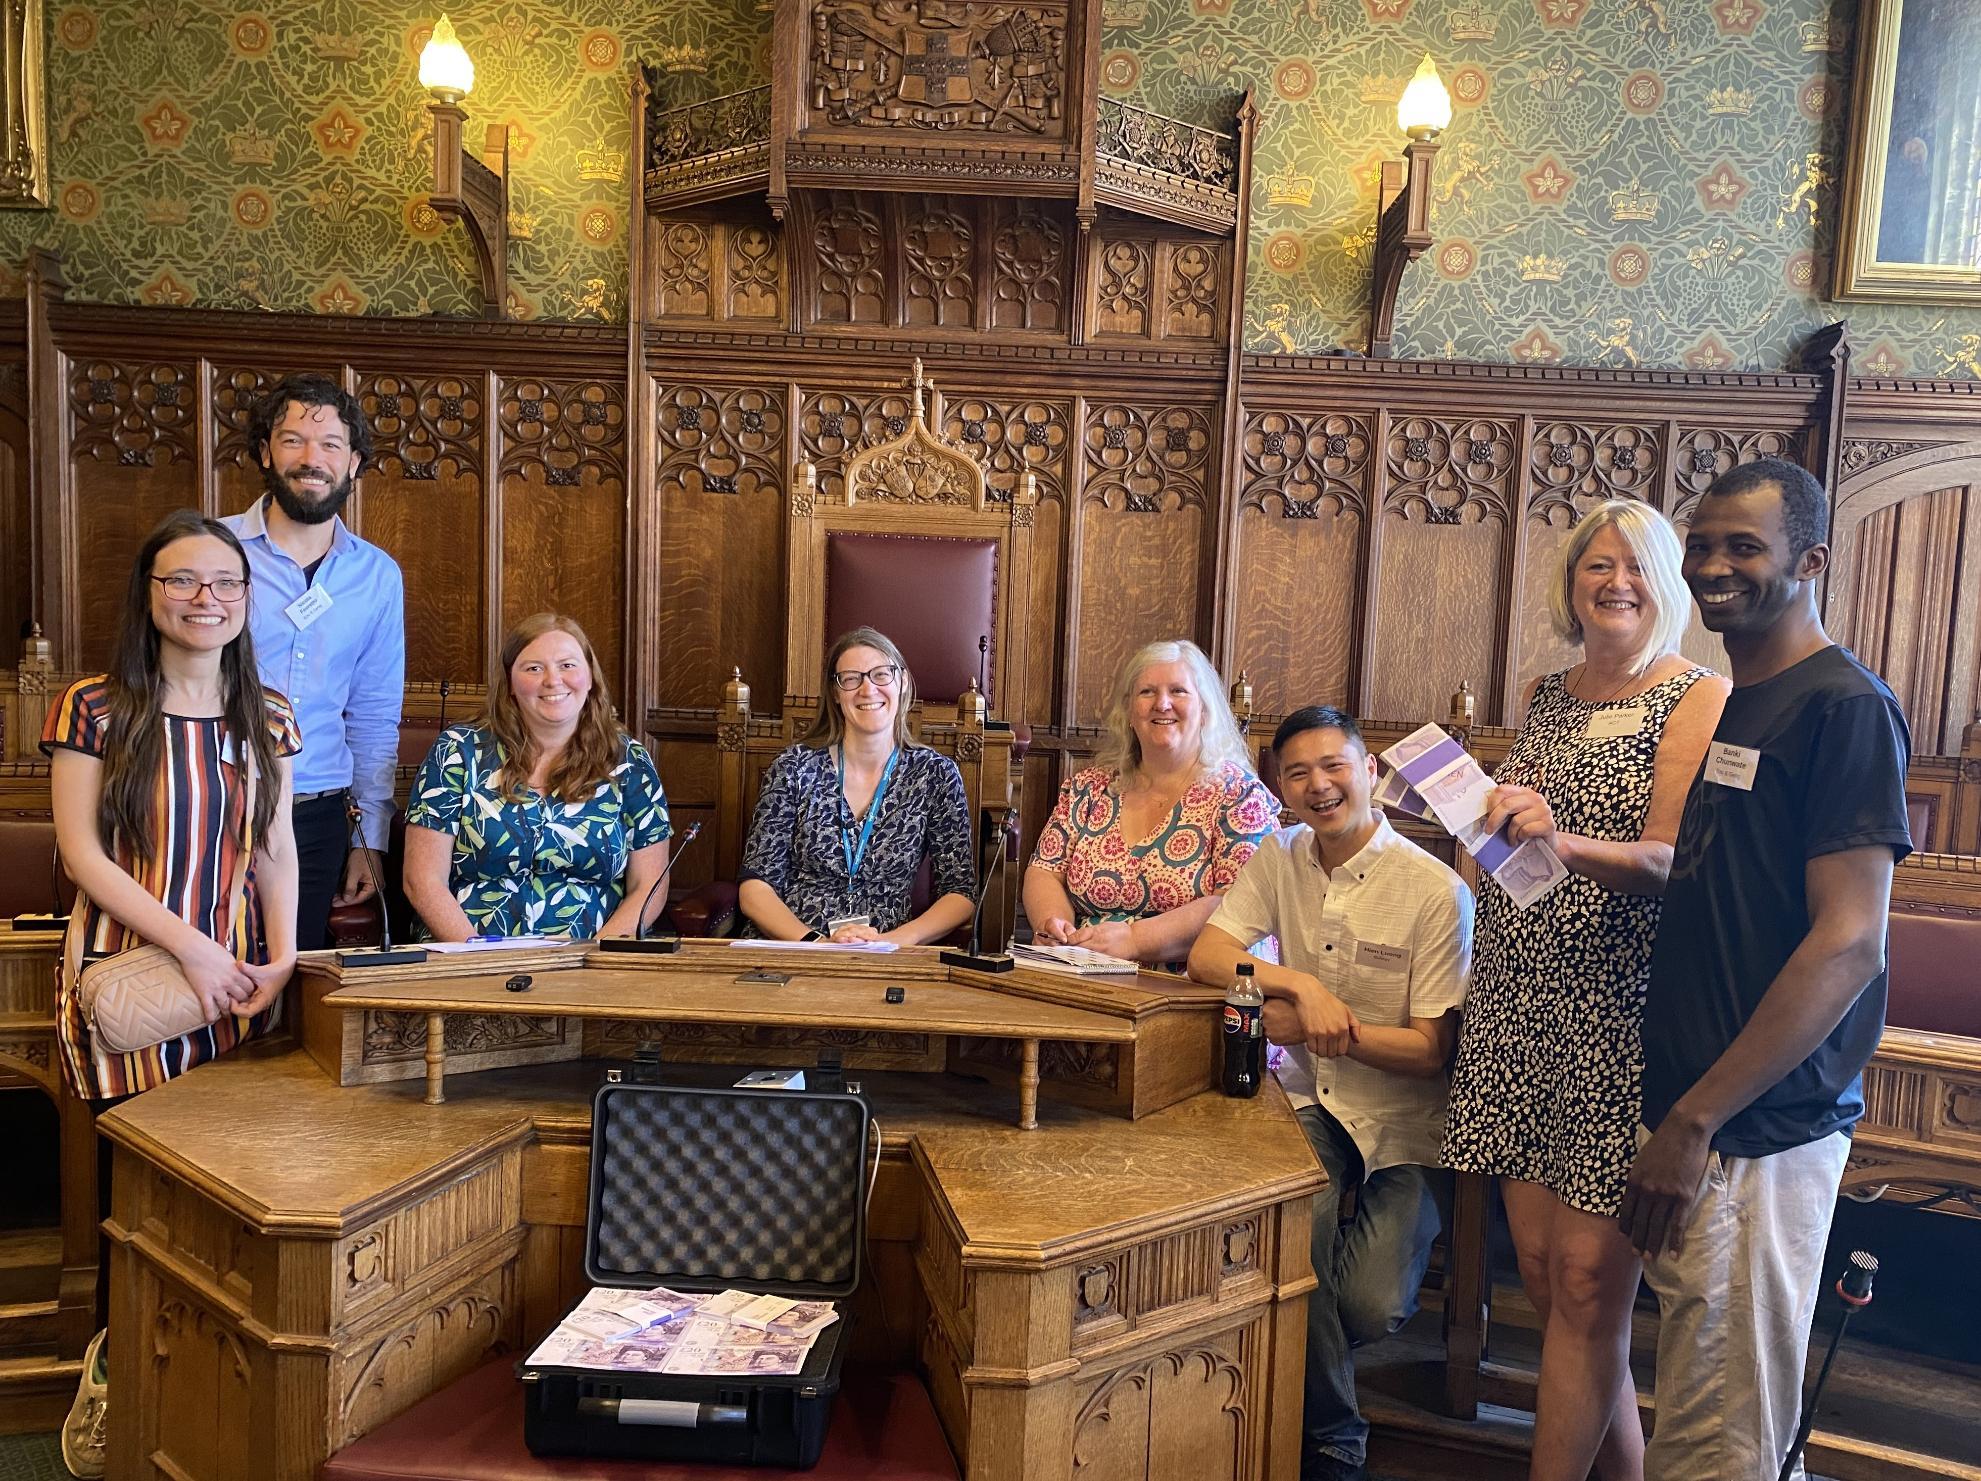 Dragons' Den Team 4 award winners pictured with Dragons in The Guildhall Council Chamber